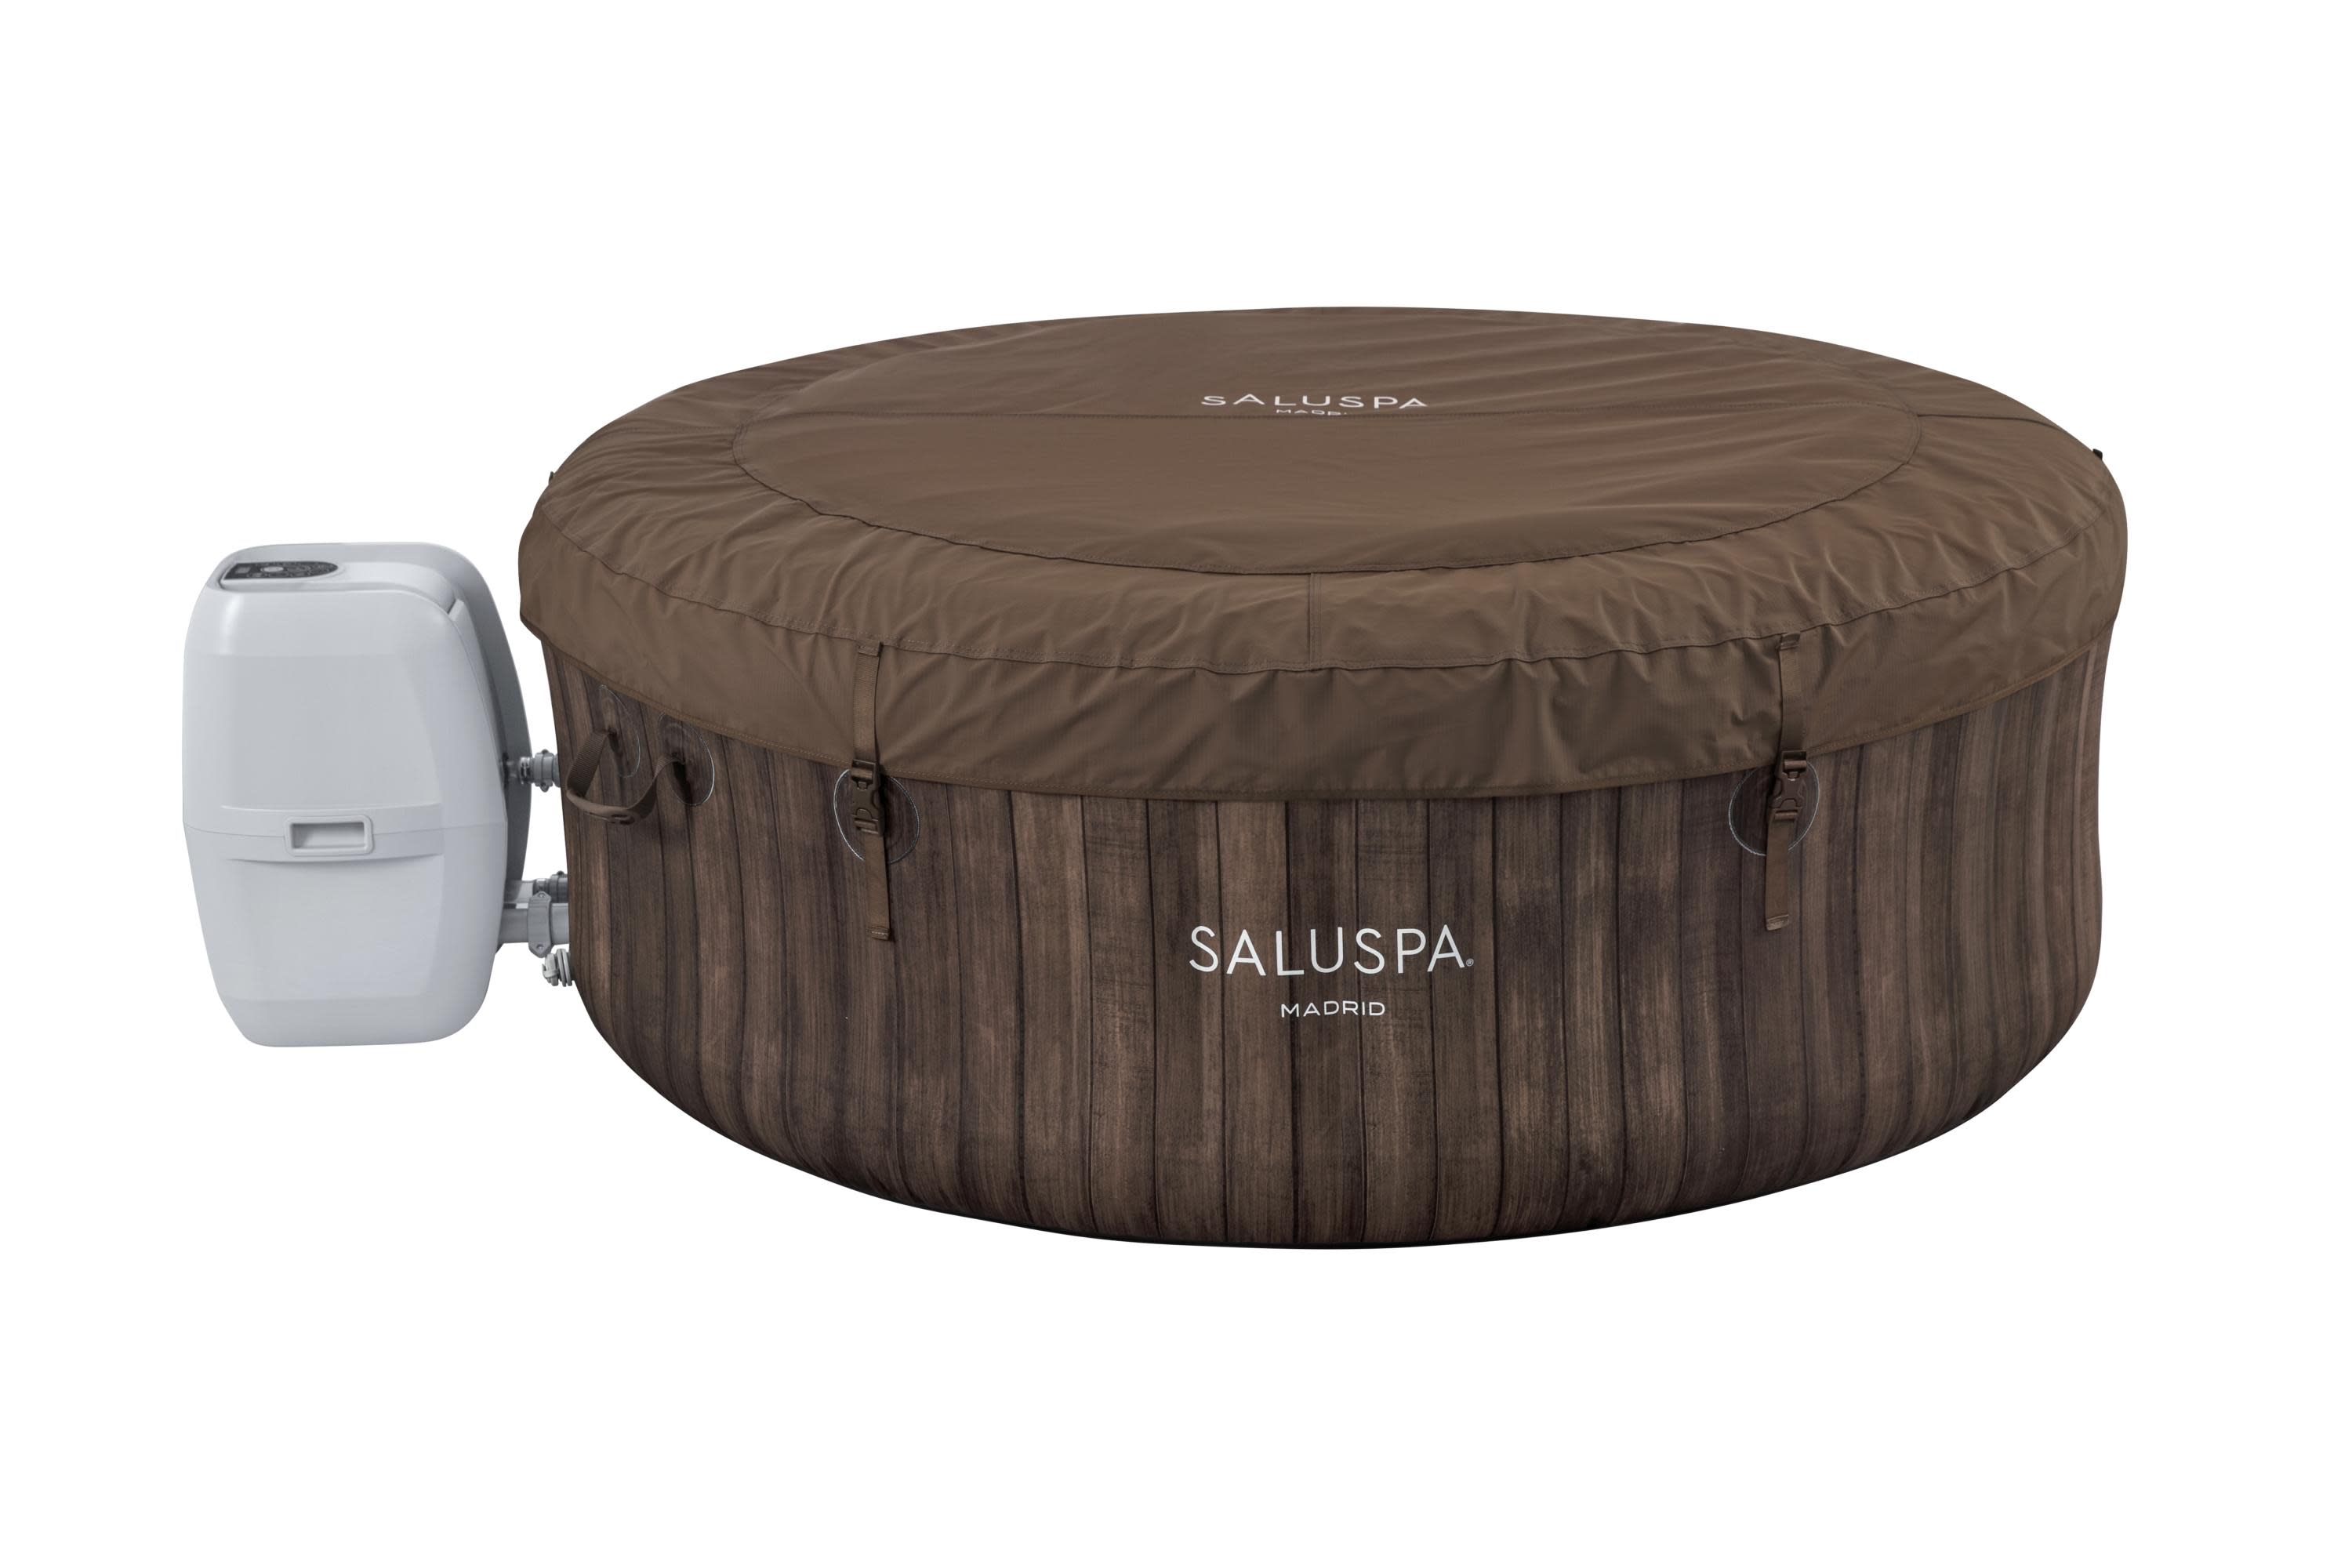 Bestway SaluSpa 71 in. x 26 in. Madrid 177 Gal Inflatable Hot Tub, 104˚F Max Temperature - image 4 of 9